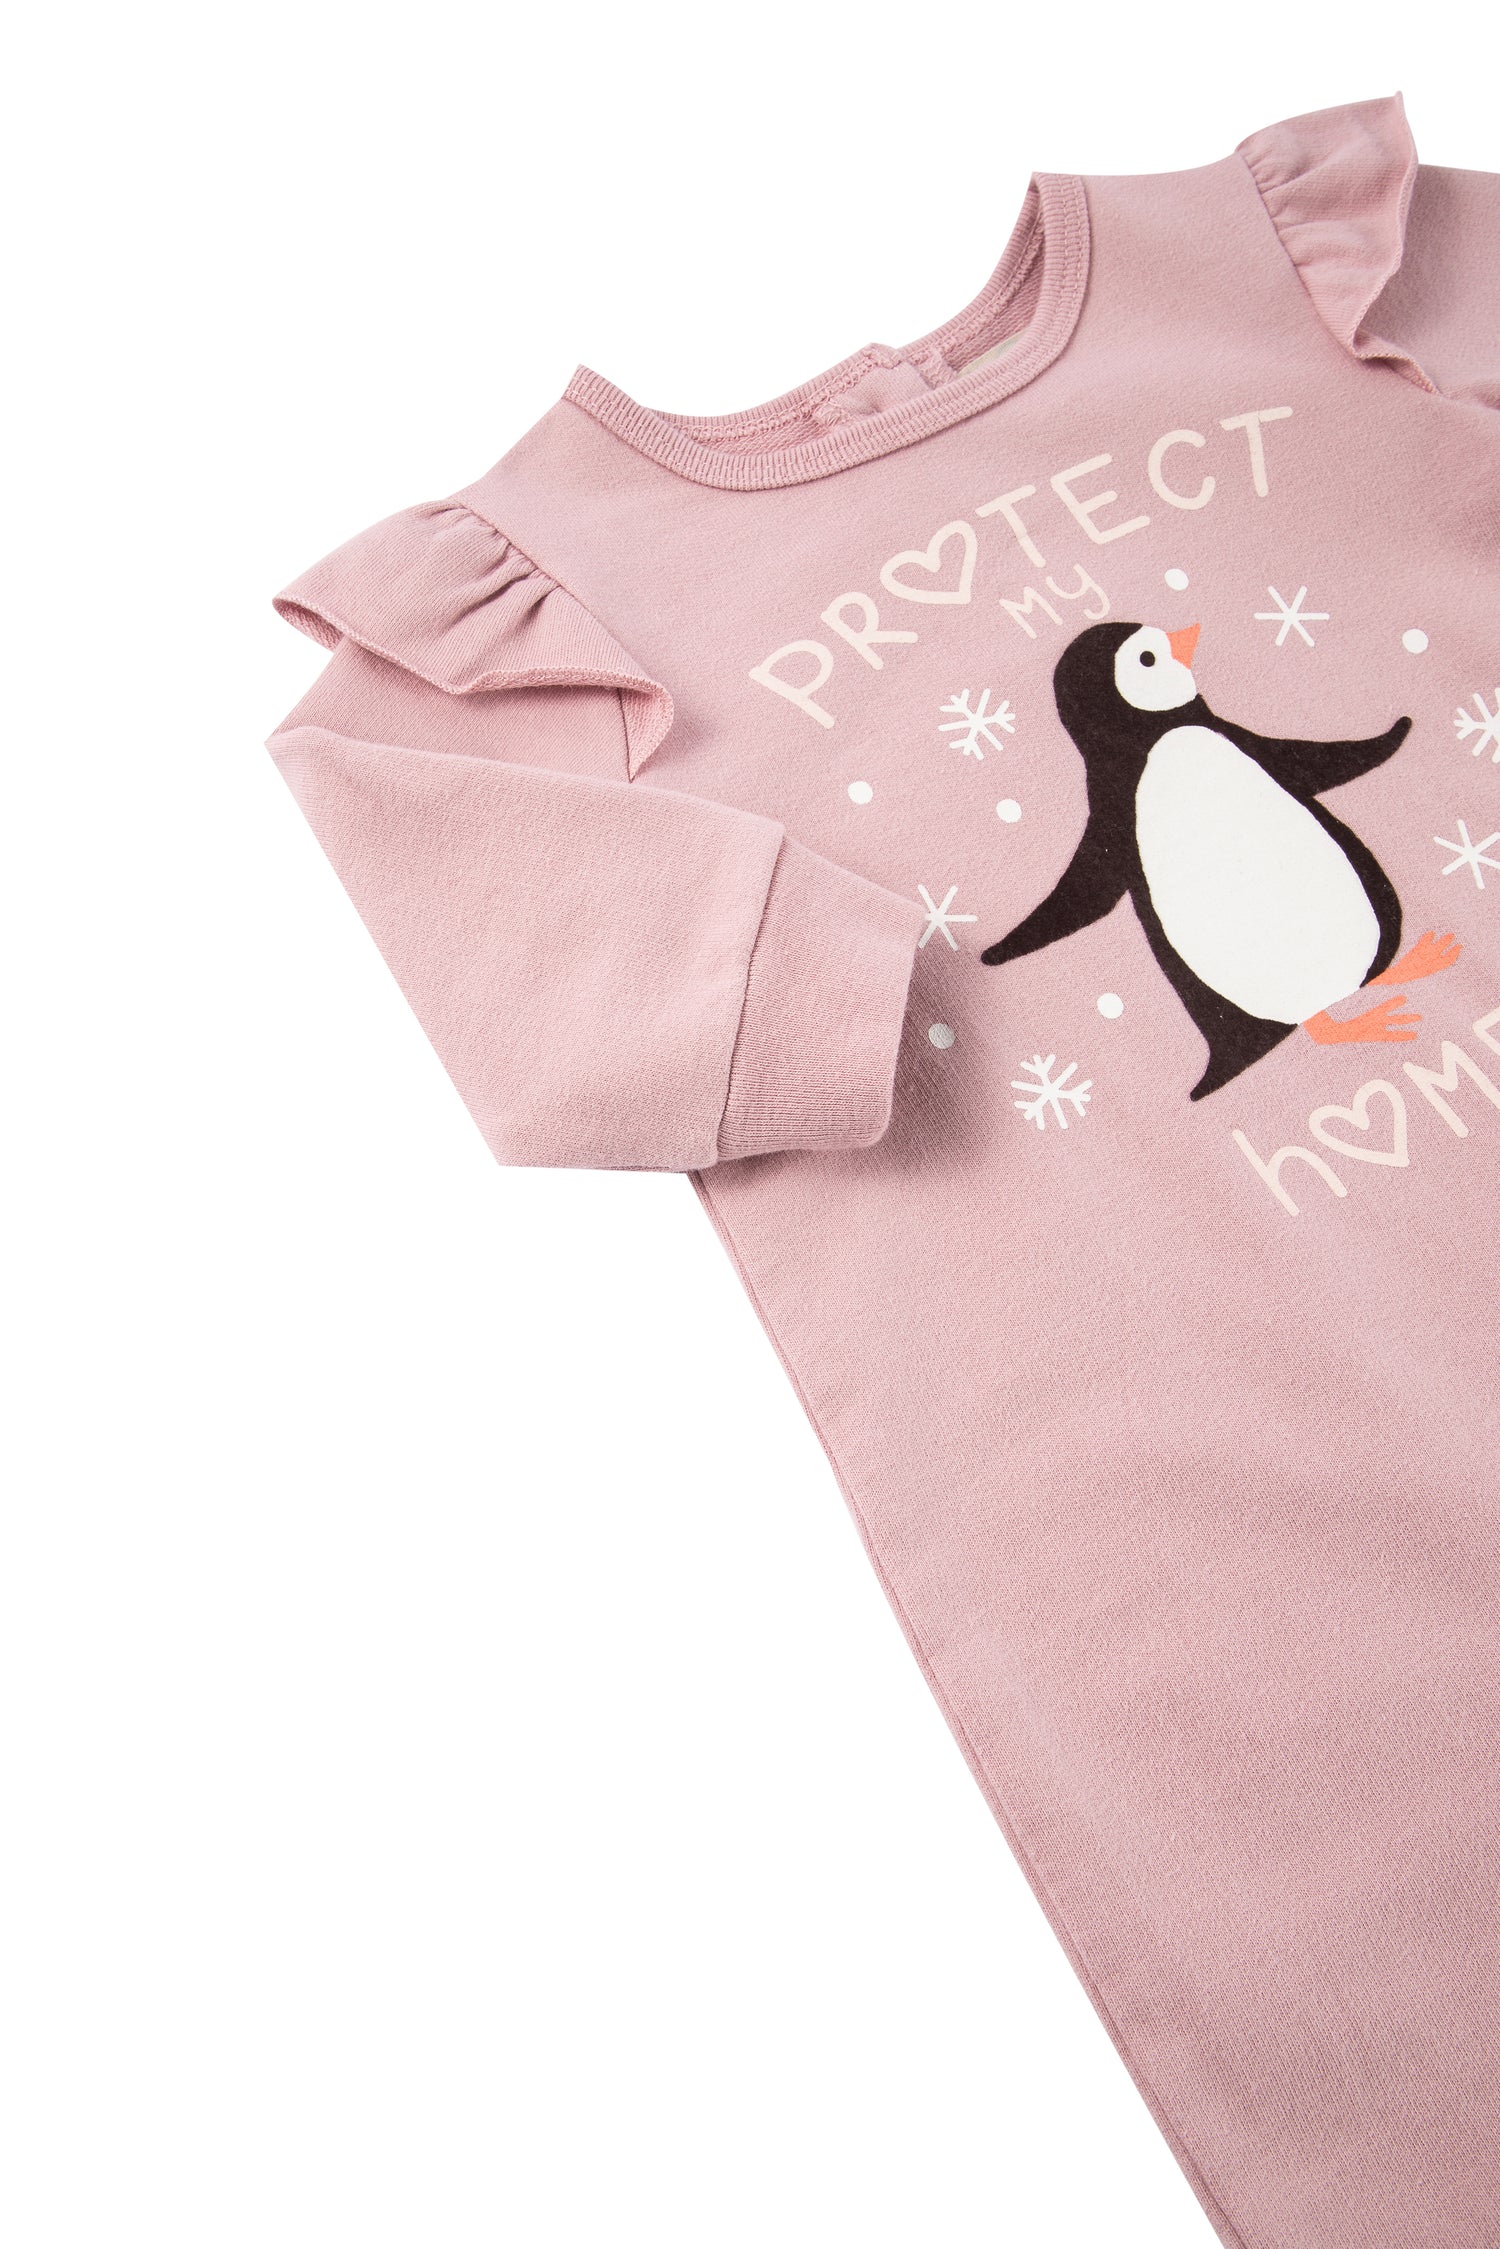 Close up view of child's pink penguin romper with "protect my home" written 